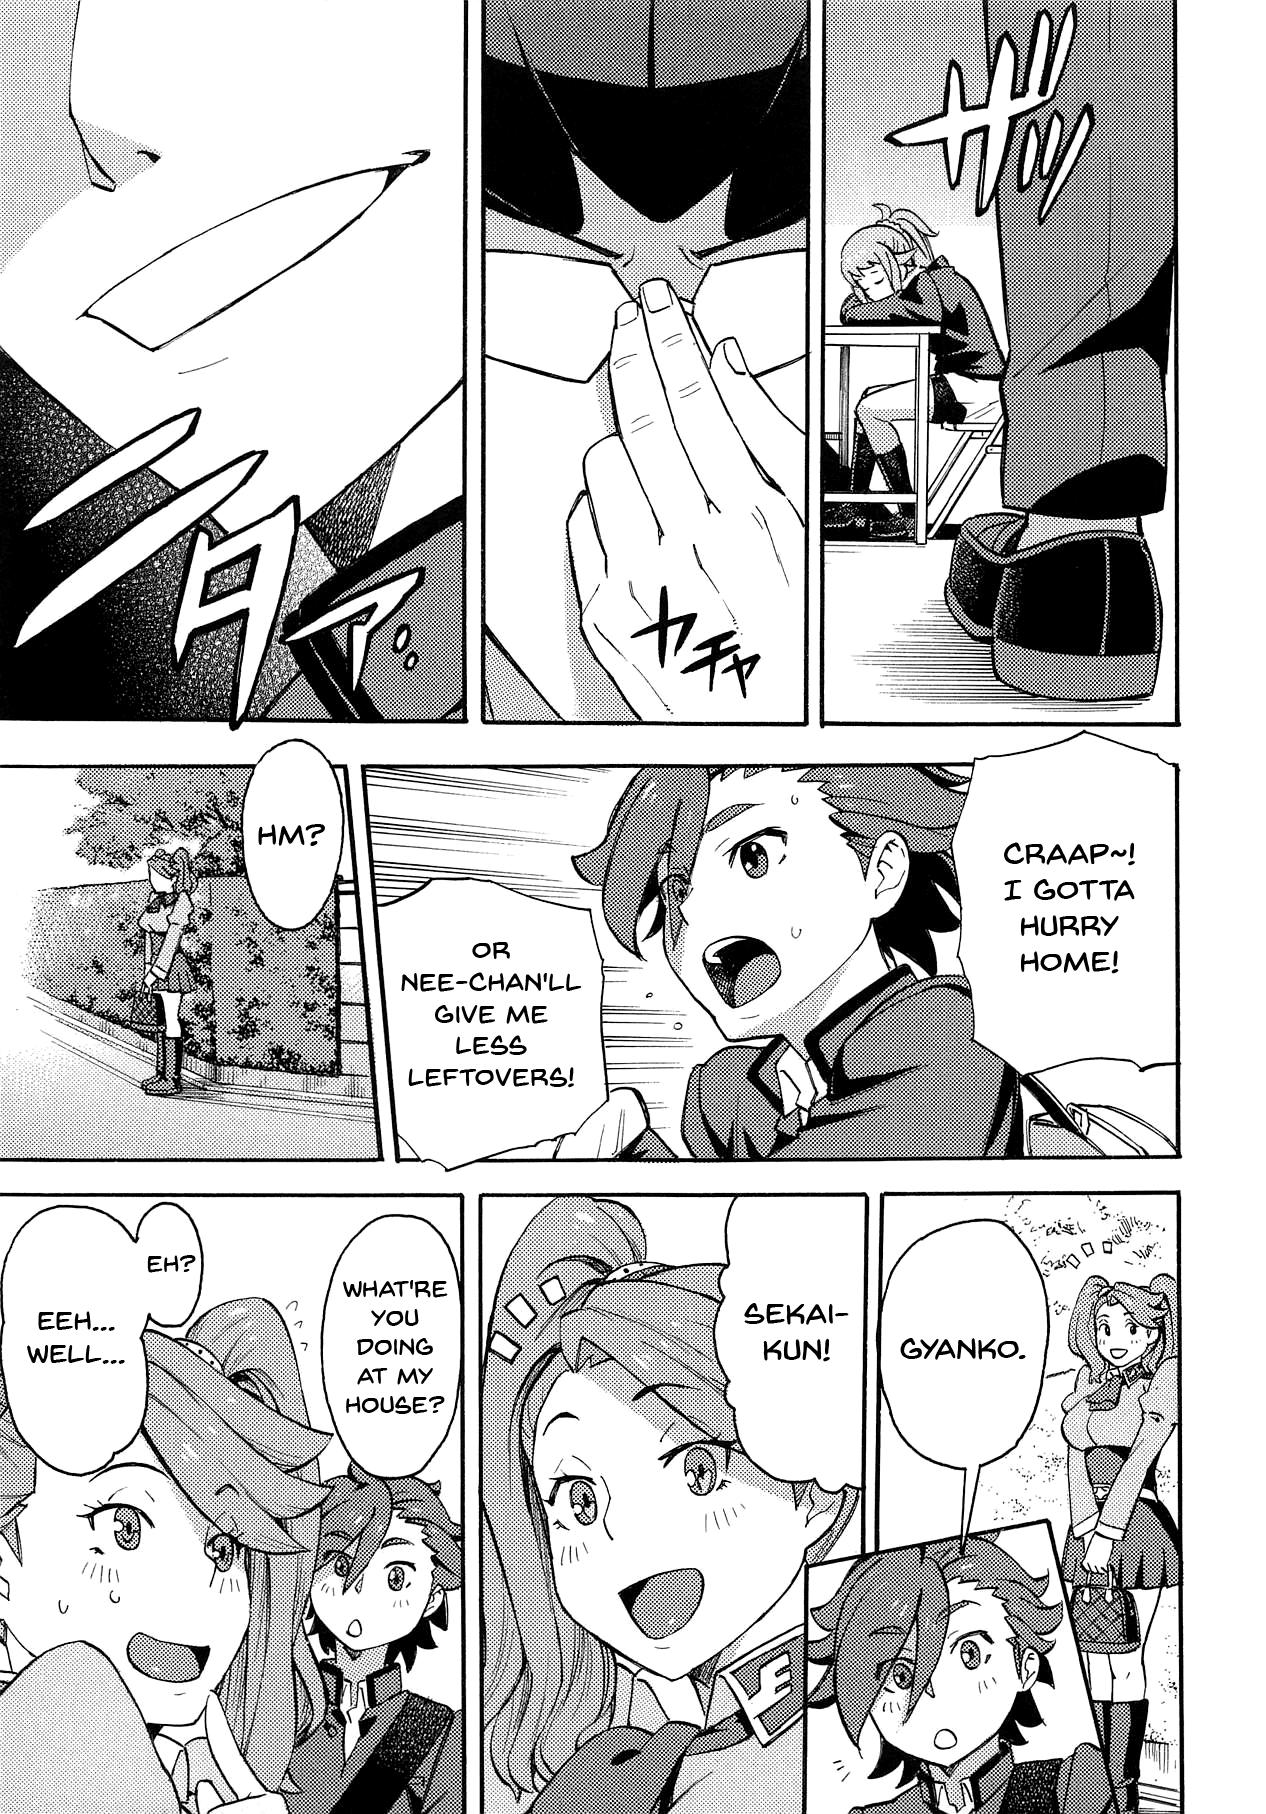 Creampie BUILD OVER TRY! - Gundam build fighters try Panty - Page 6